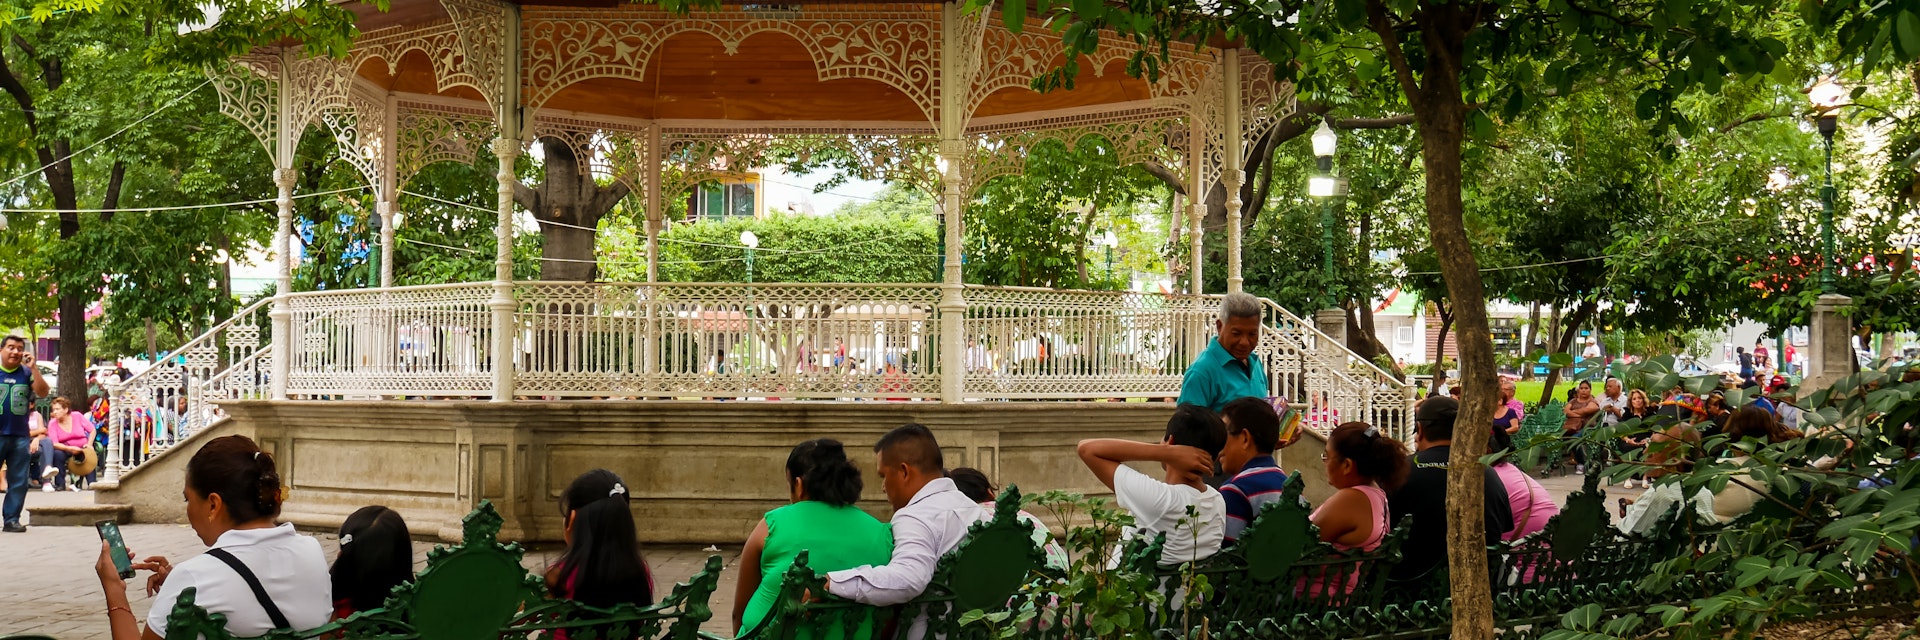 Locals relaxing on Marimba Park's benches in front of the picturesque bandstand in Tuxtla Gutiérrez, Mexico.